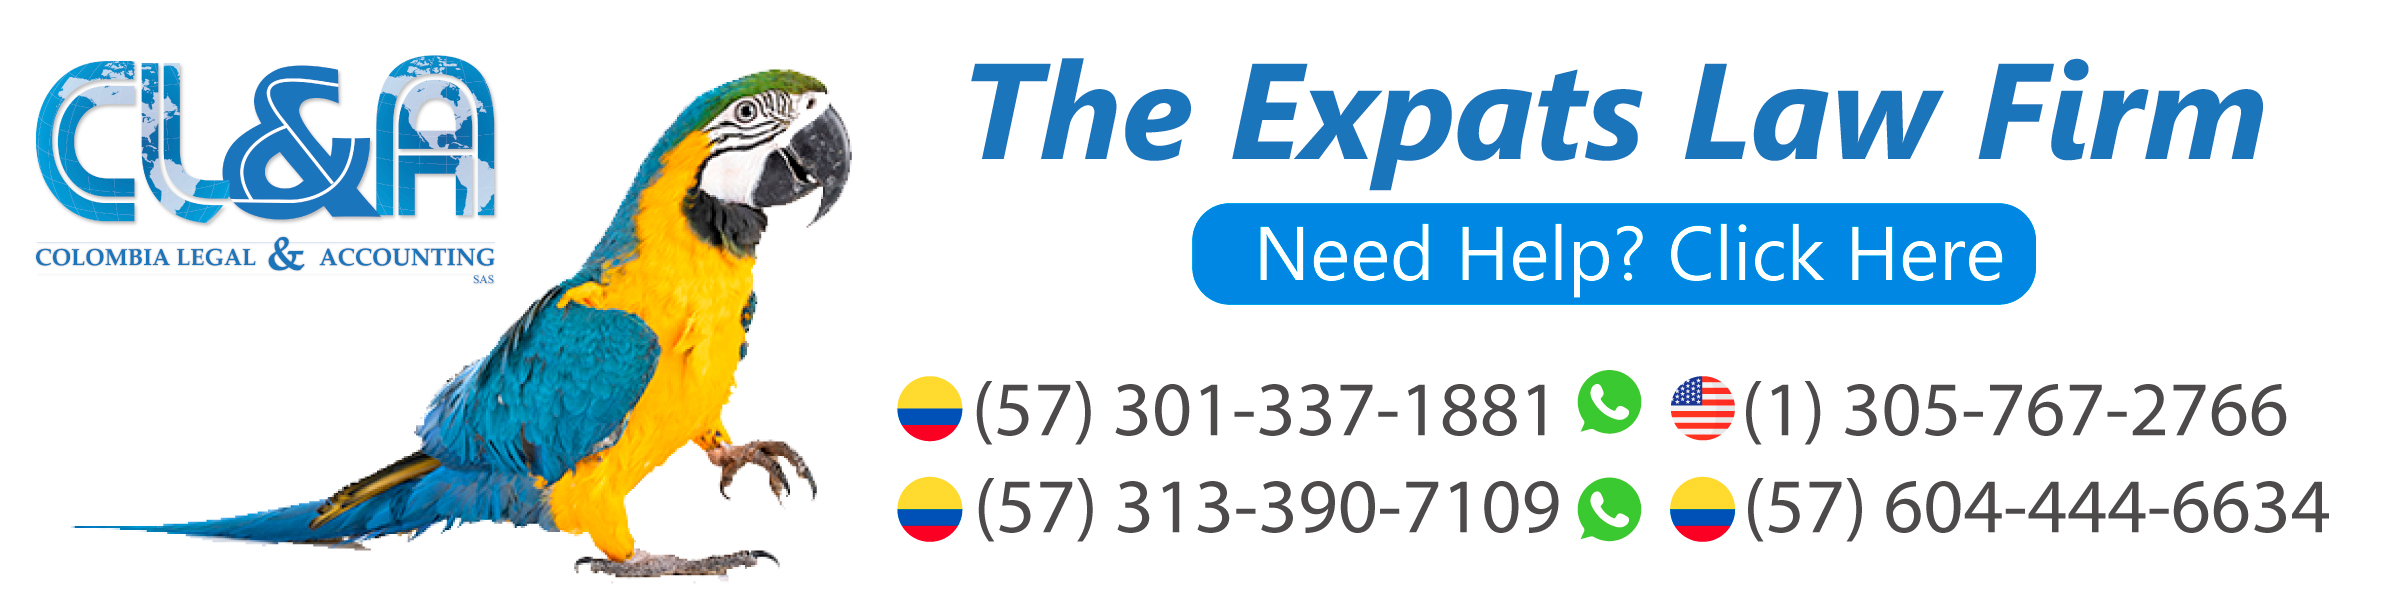 The-Expats-Law-Firm-Contact-Us